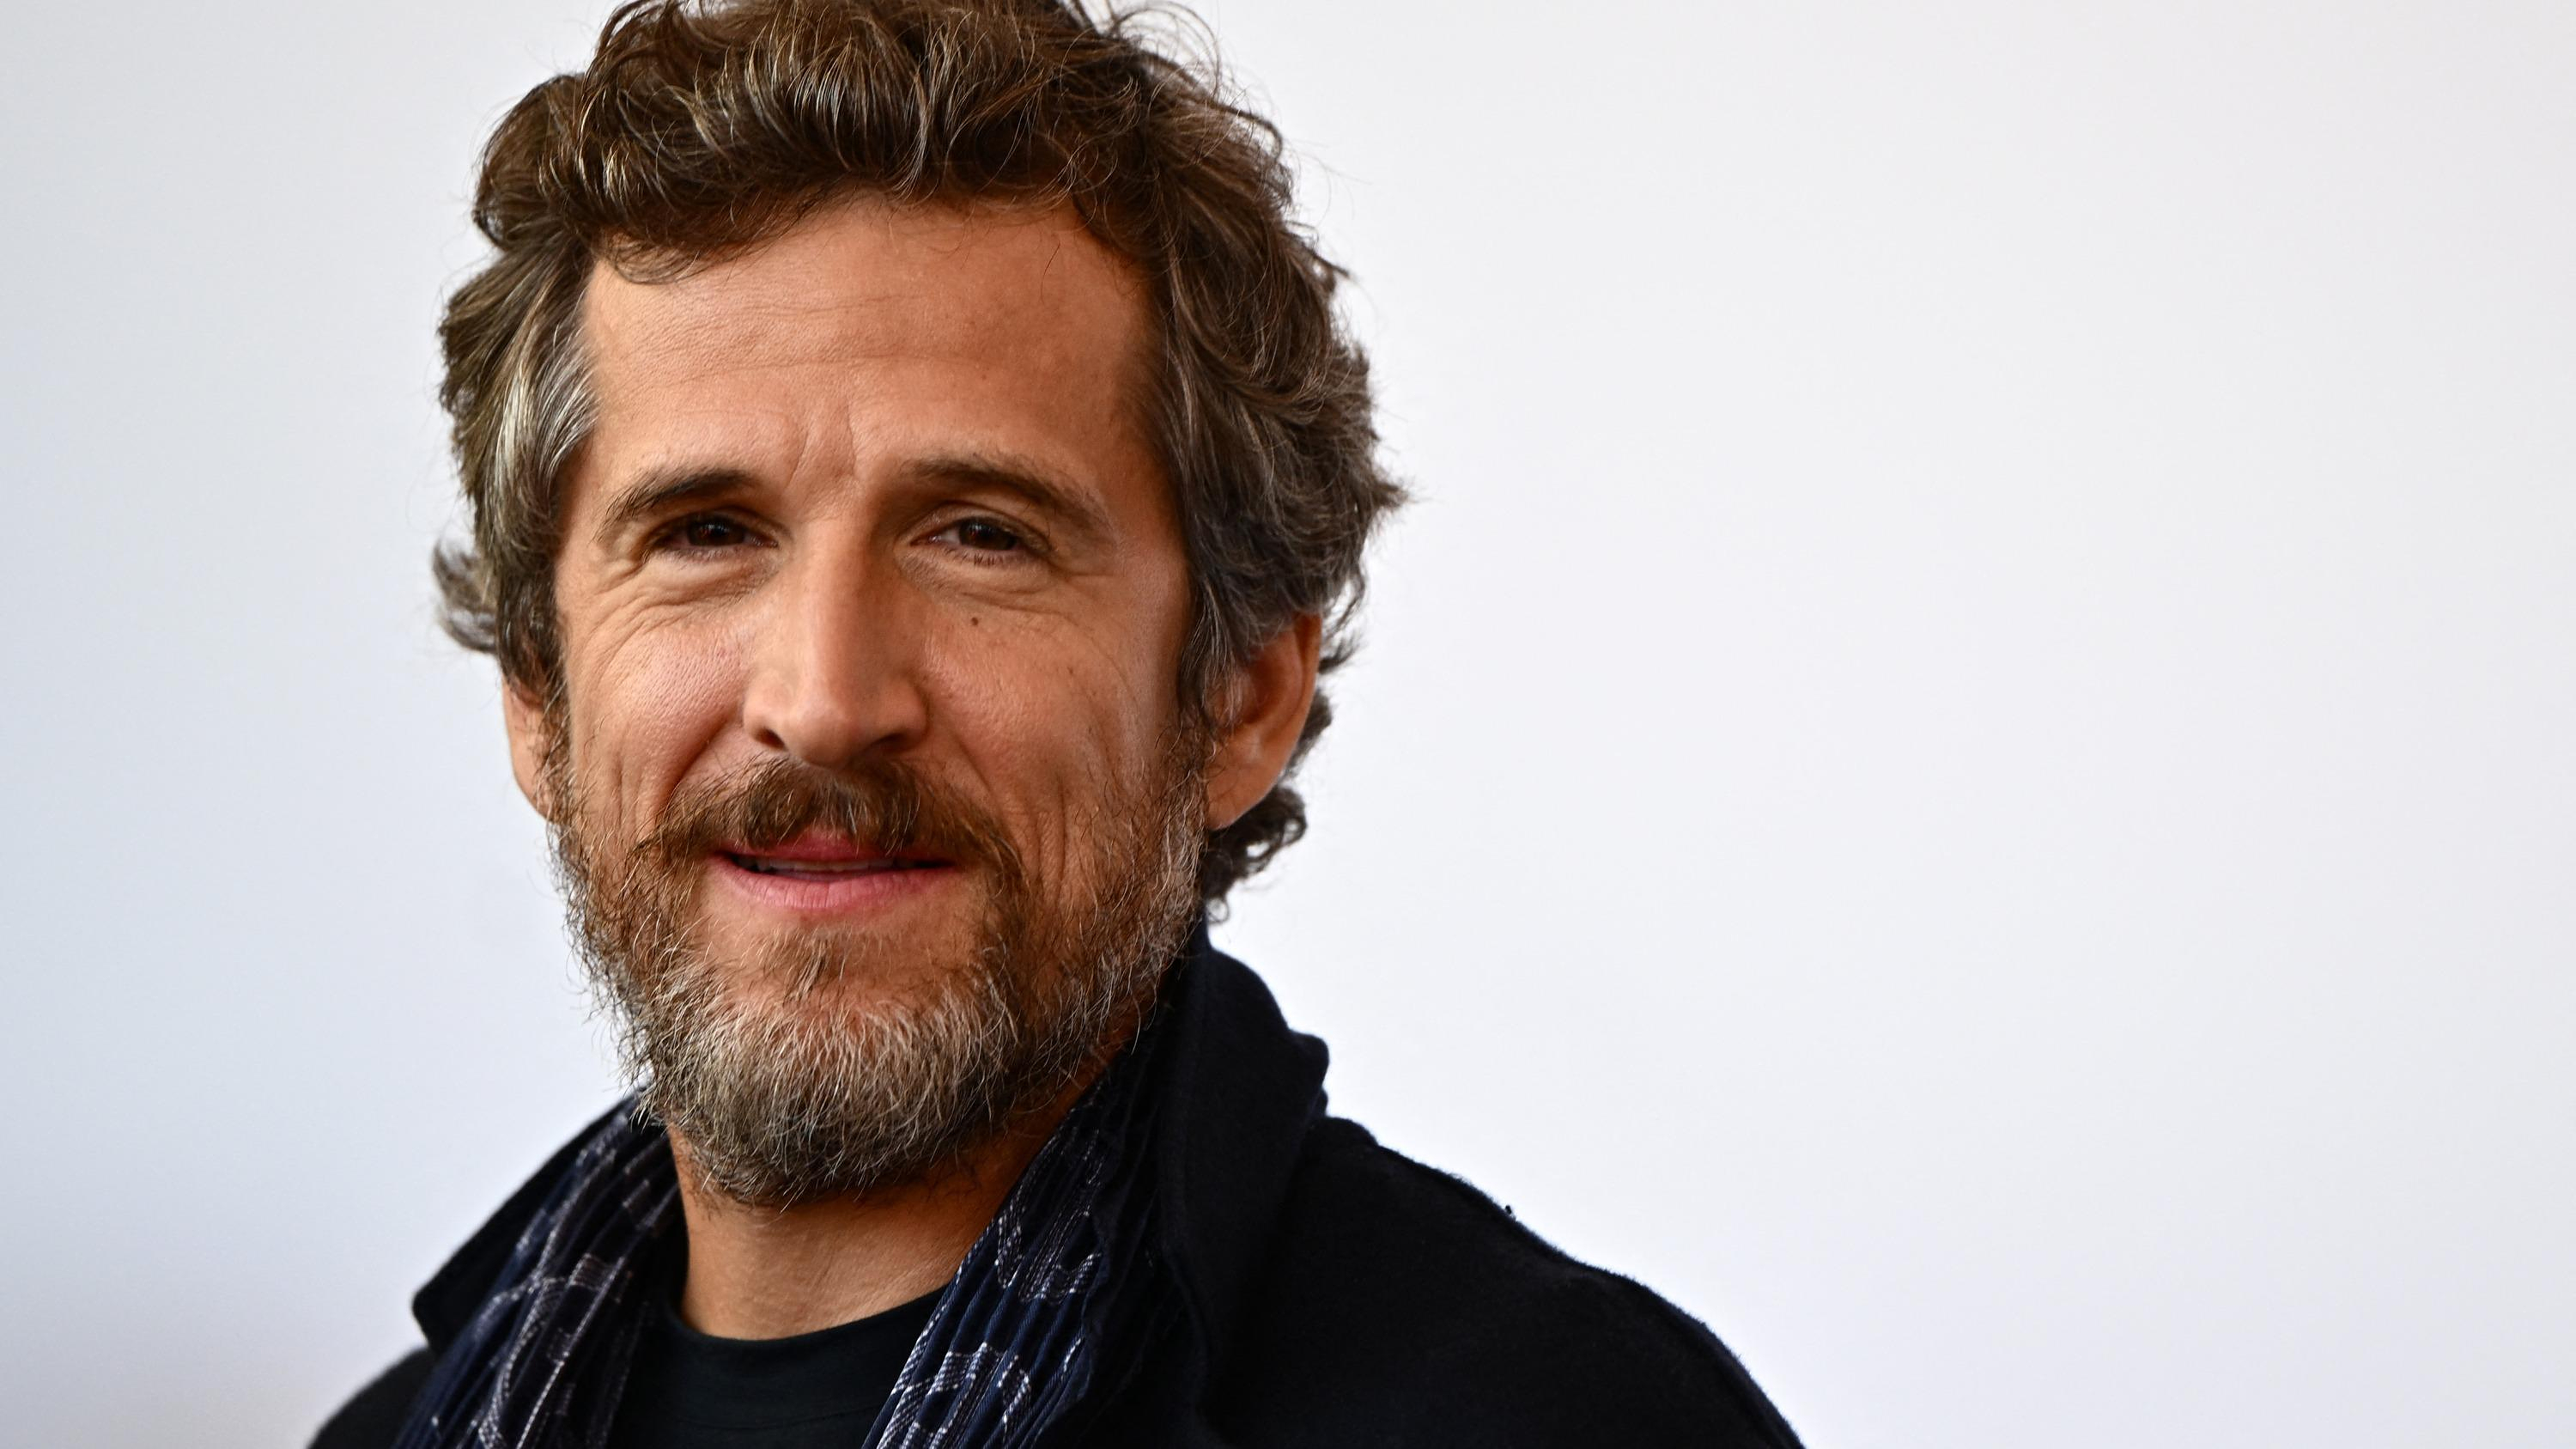 For Guillaume Canet, it is “impossible to go and promote” Benoît Jacquot’s latest film